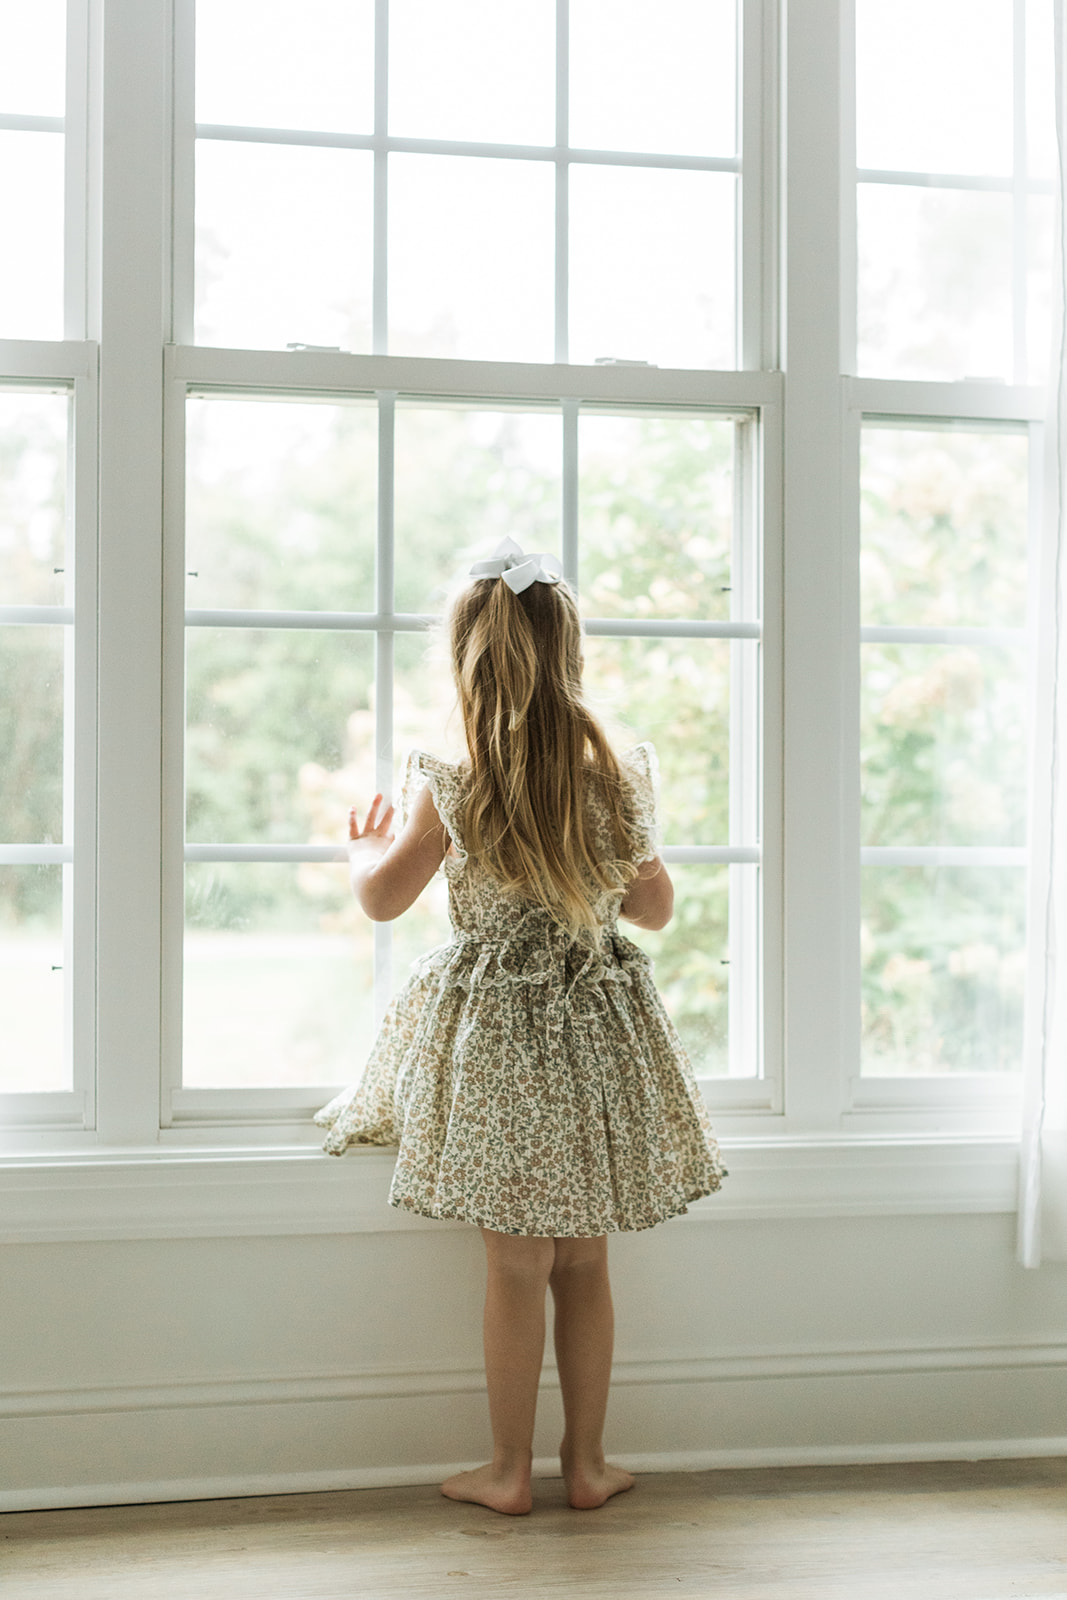 1 year old photo shoot in nashville tennessee. little girl looking out window